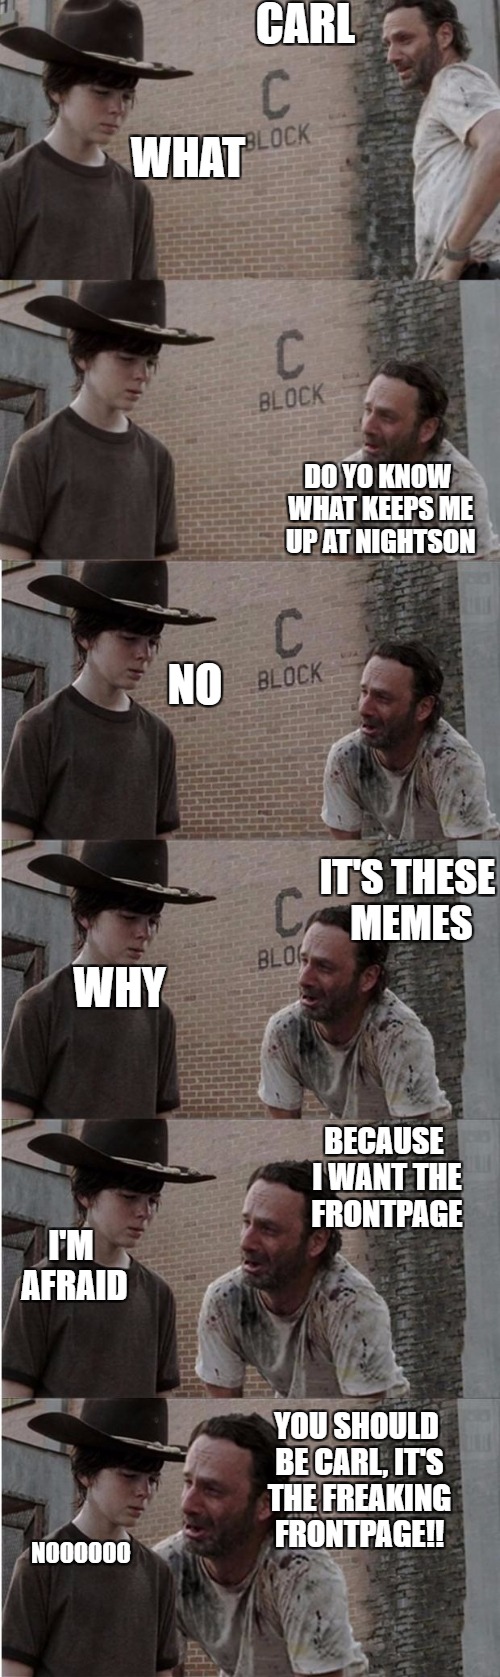 Rick and Carl Longer | CARL; WHAT; DO YO KNOW WHAT KEEPS ME UP AT NIGHTSON; NO; IT'S THESE MEMES; WHY; BECAUSE I WANT THE FRONTPAGE; I'M AFRAID; YOU SHOULD BE CARL, IT'S THE FREAKING FRONTPAGE!! NOOOOOO | image tagged in memes,rick and carl longer | made w/ Imgflip meme maker